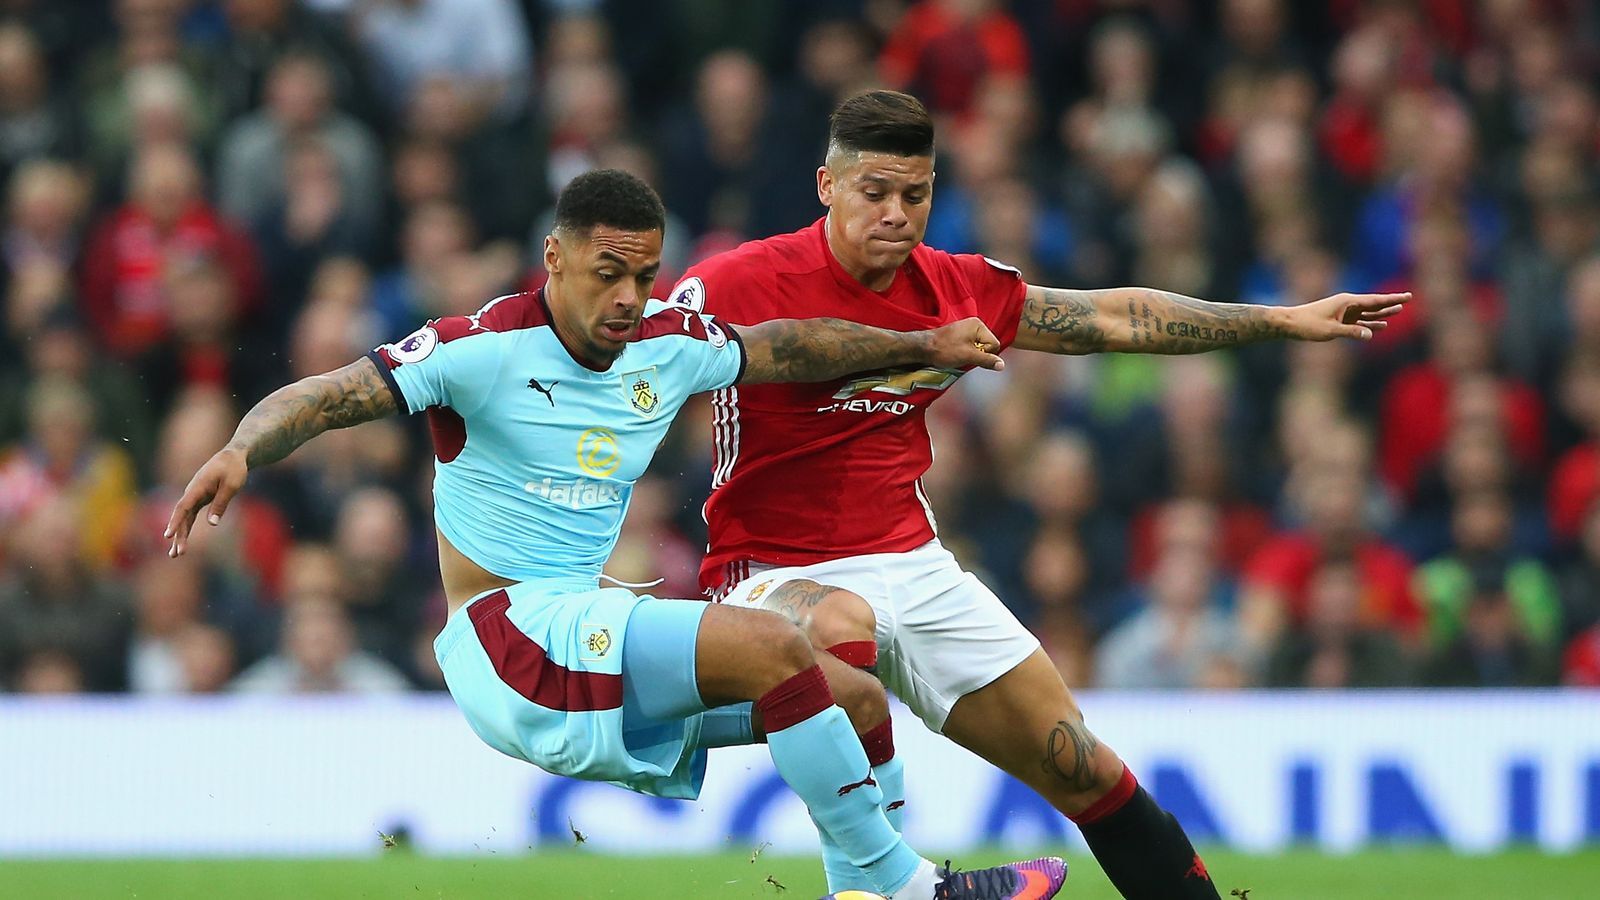 Rojo Is Likely to Transfer Away from Manchester United This Summer